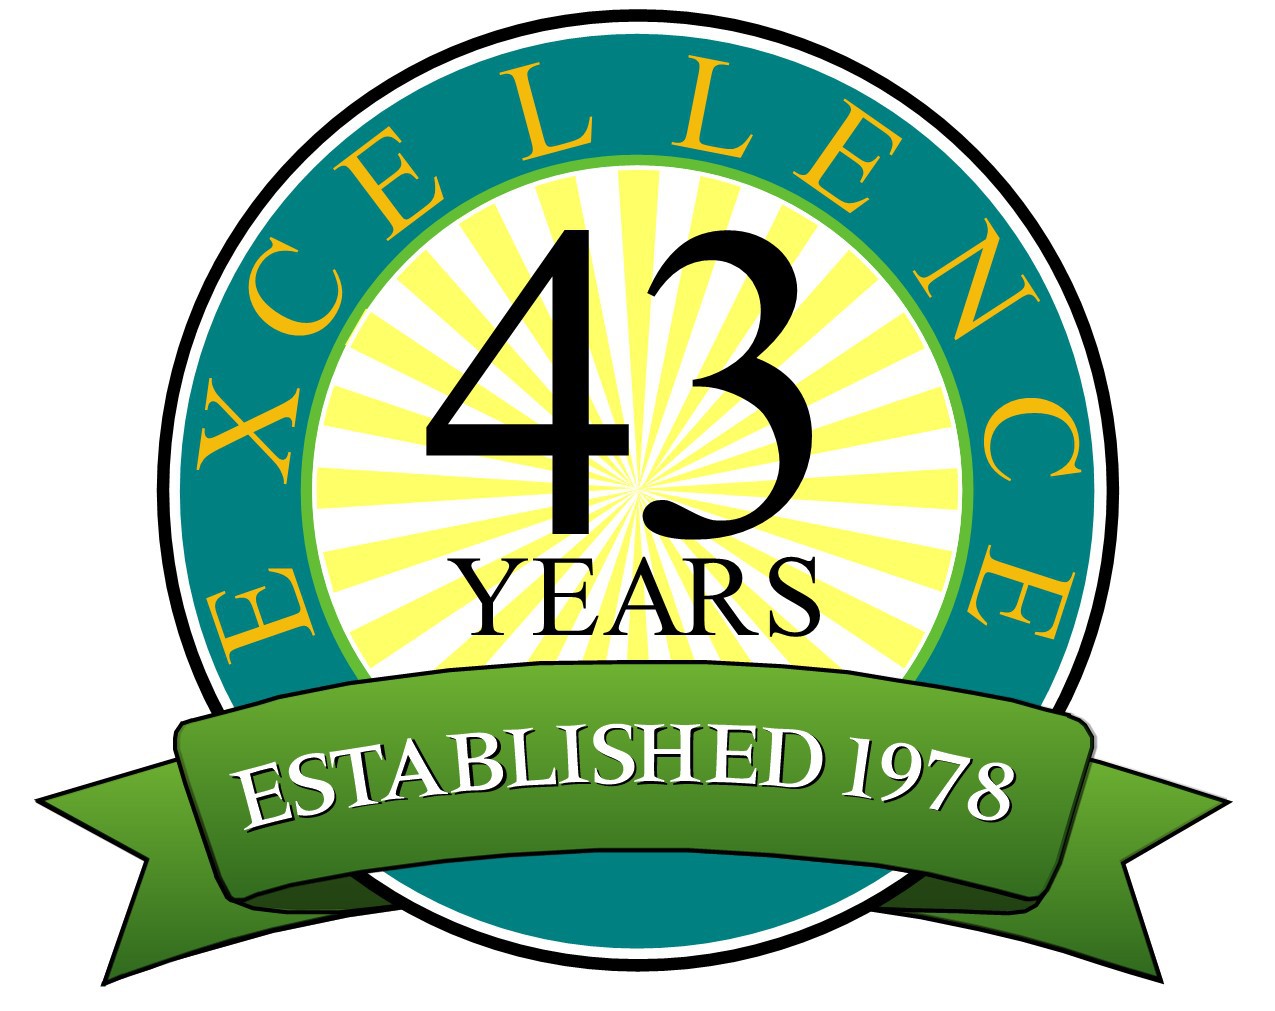 Celebrating 43 Years of Excellence